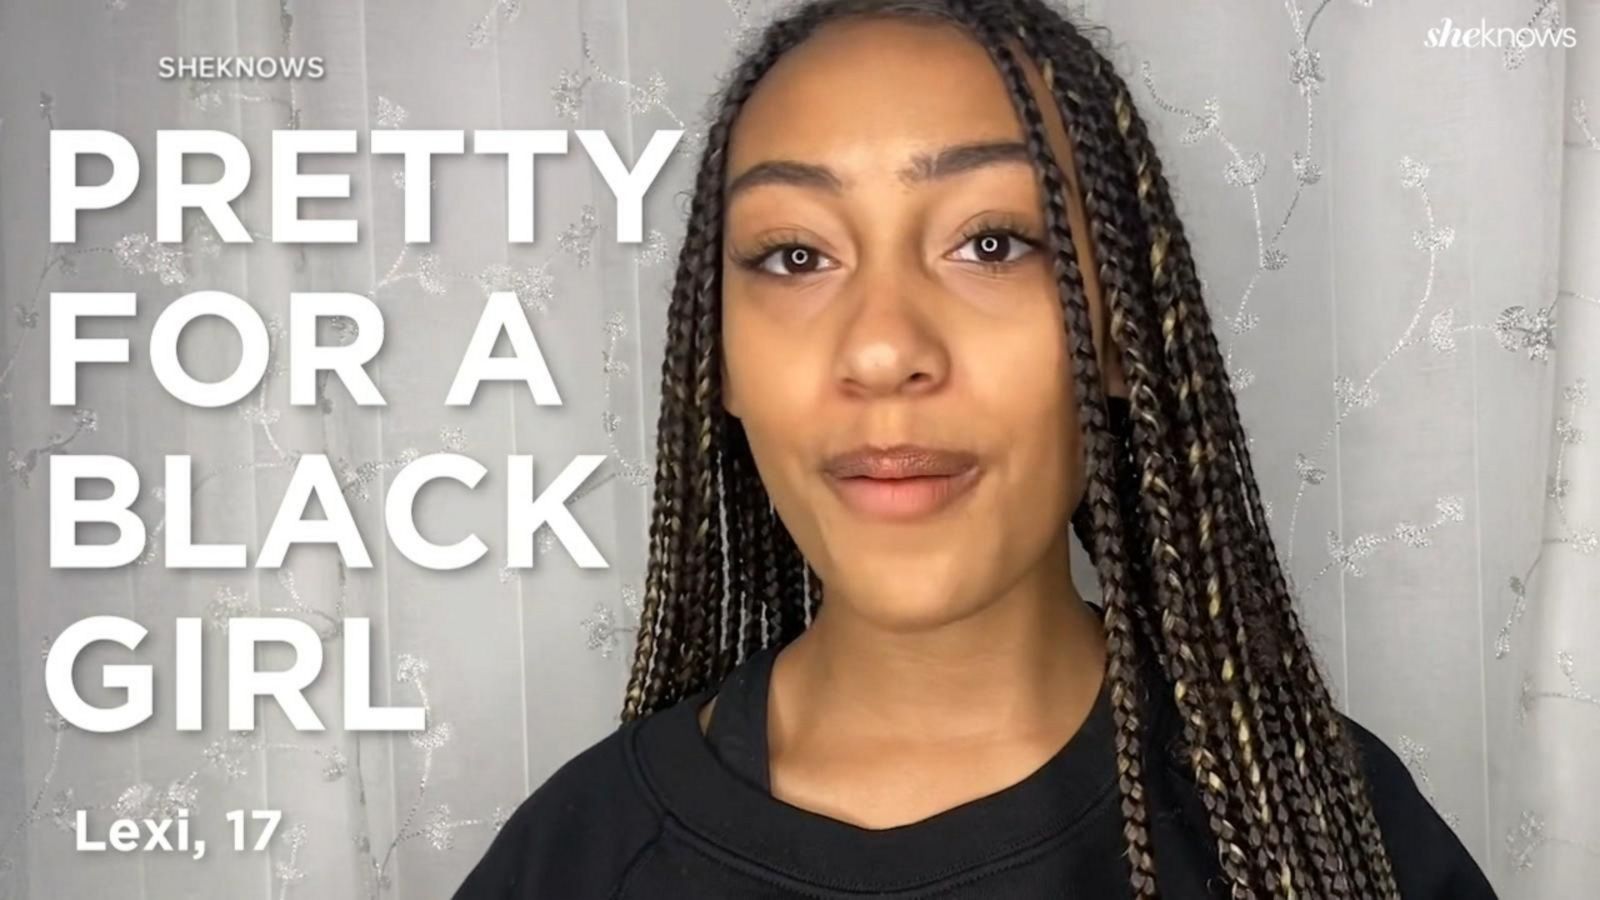 Black teen girls speak out about racial microaggressions they face - ABC  News